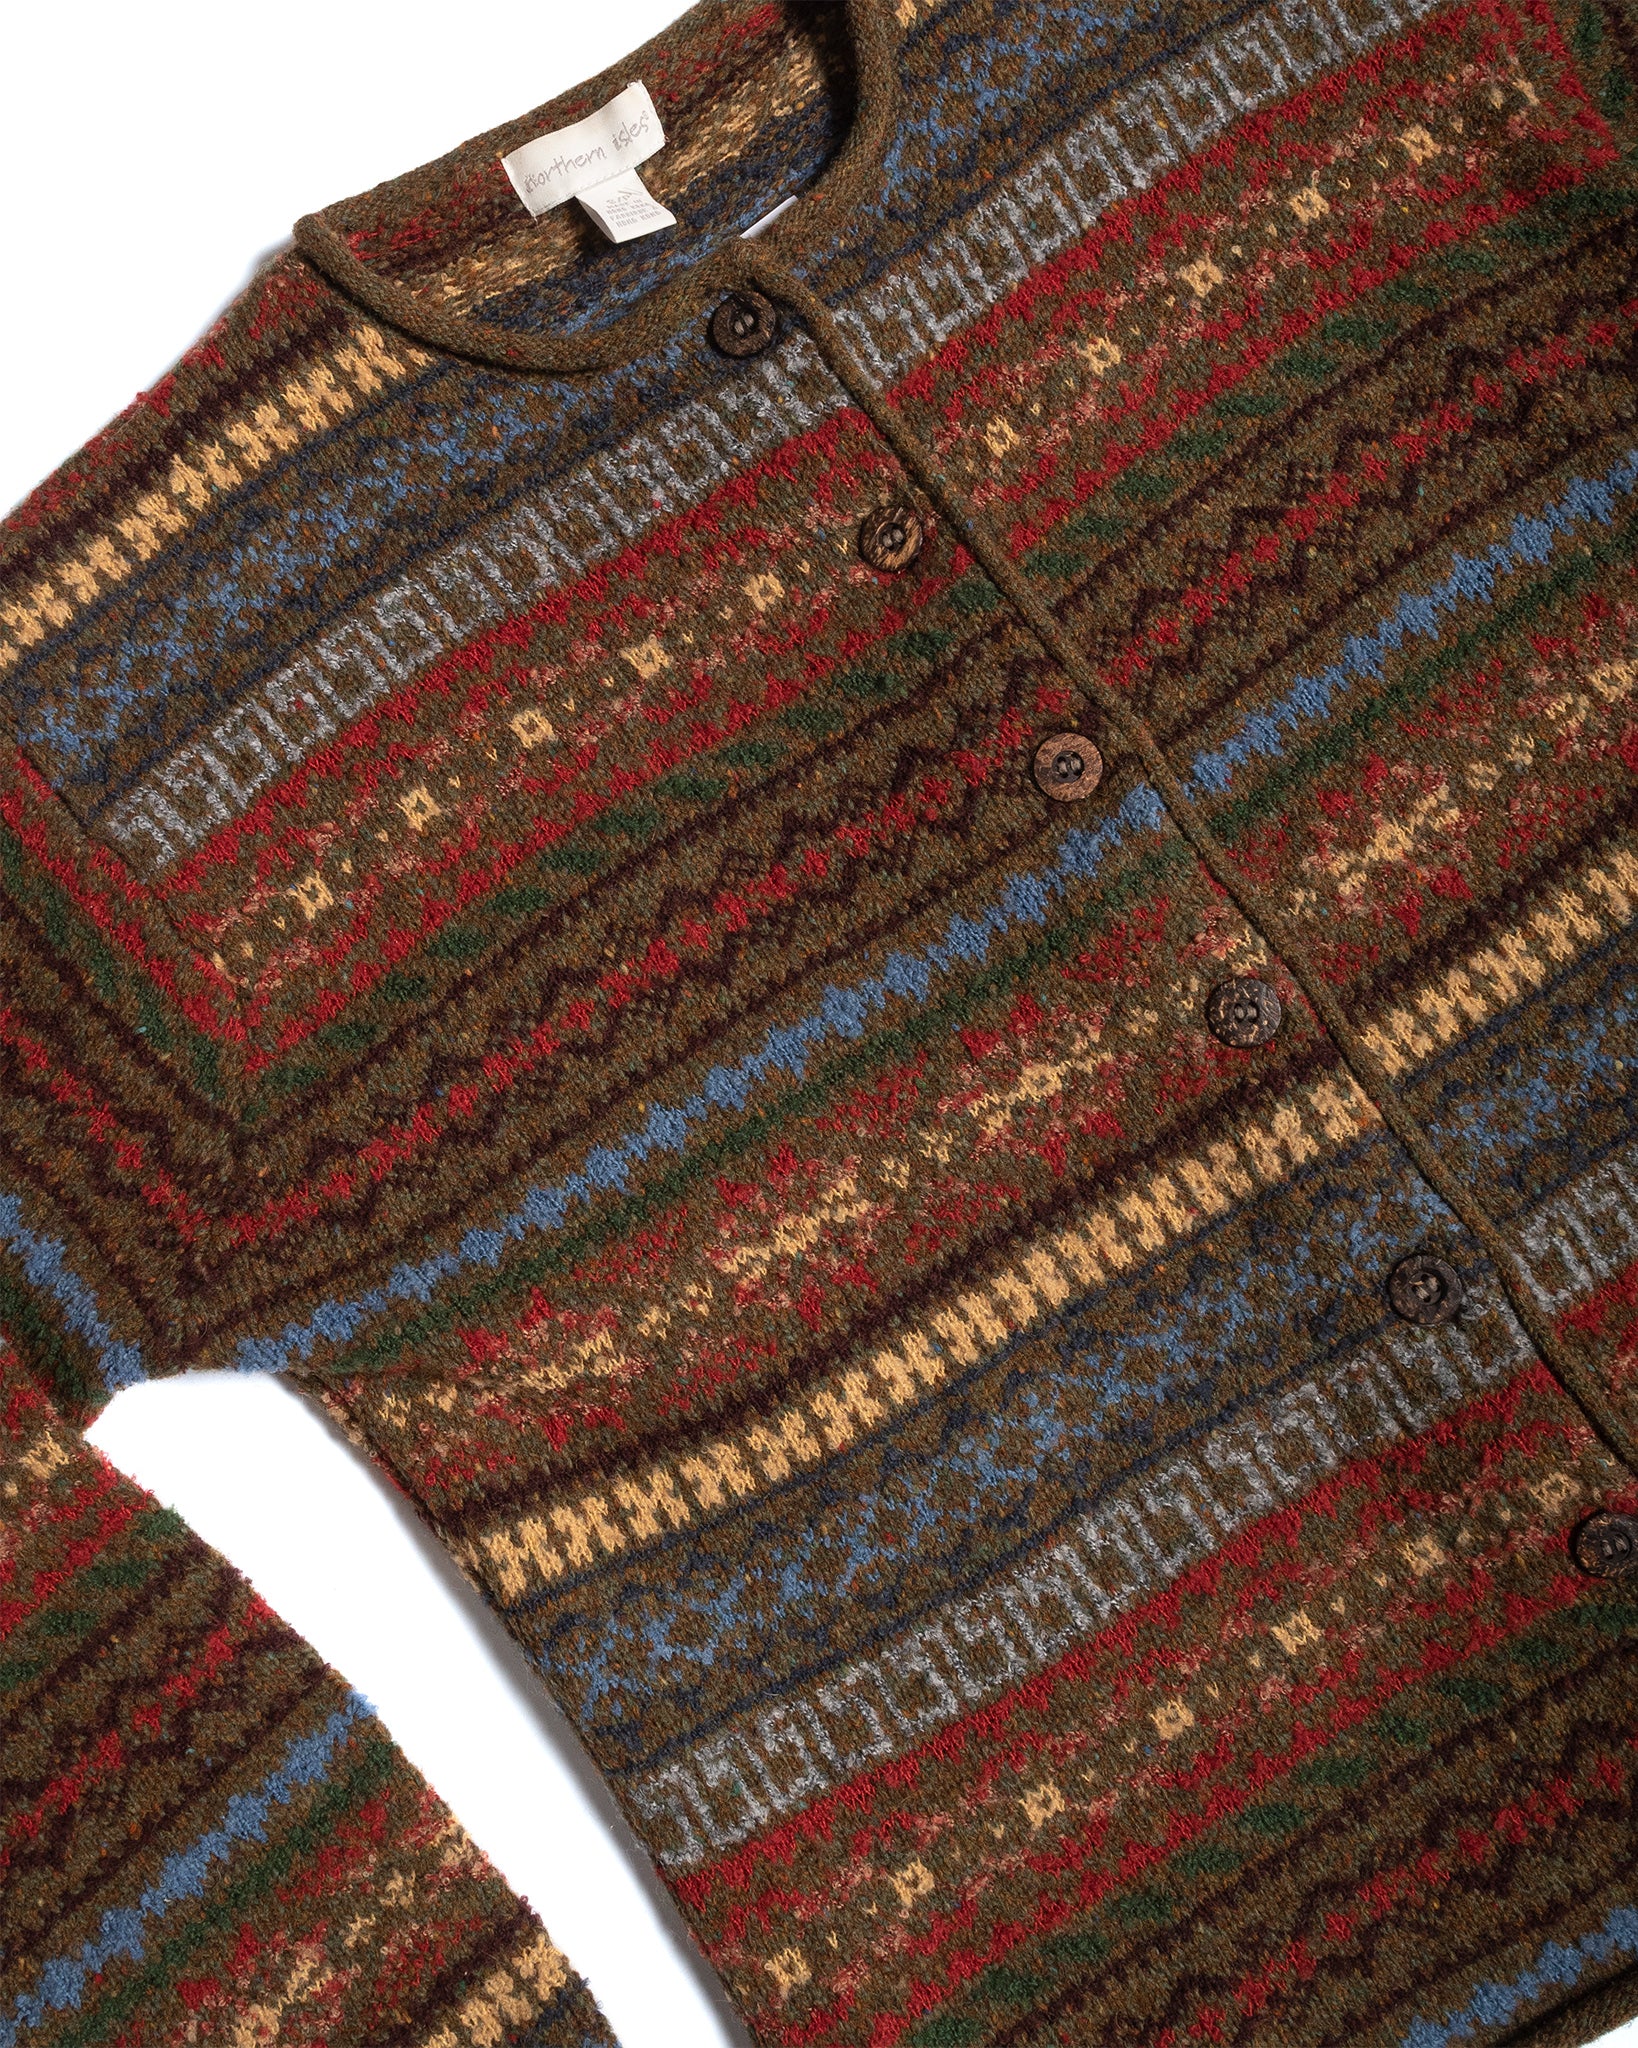 80s Fair Isle Cardigan with Wood Buttons – nouveaurichevintage